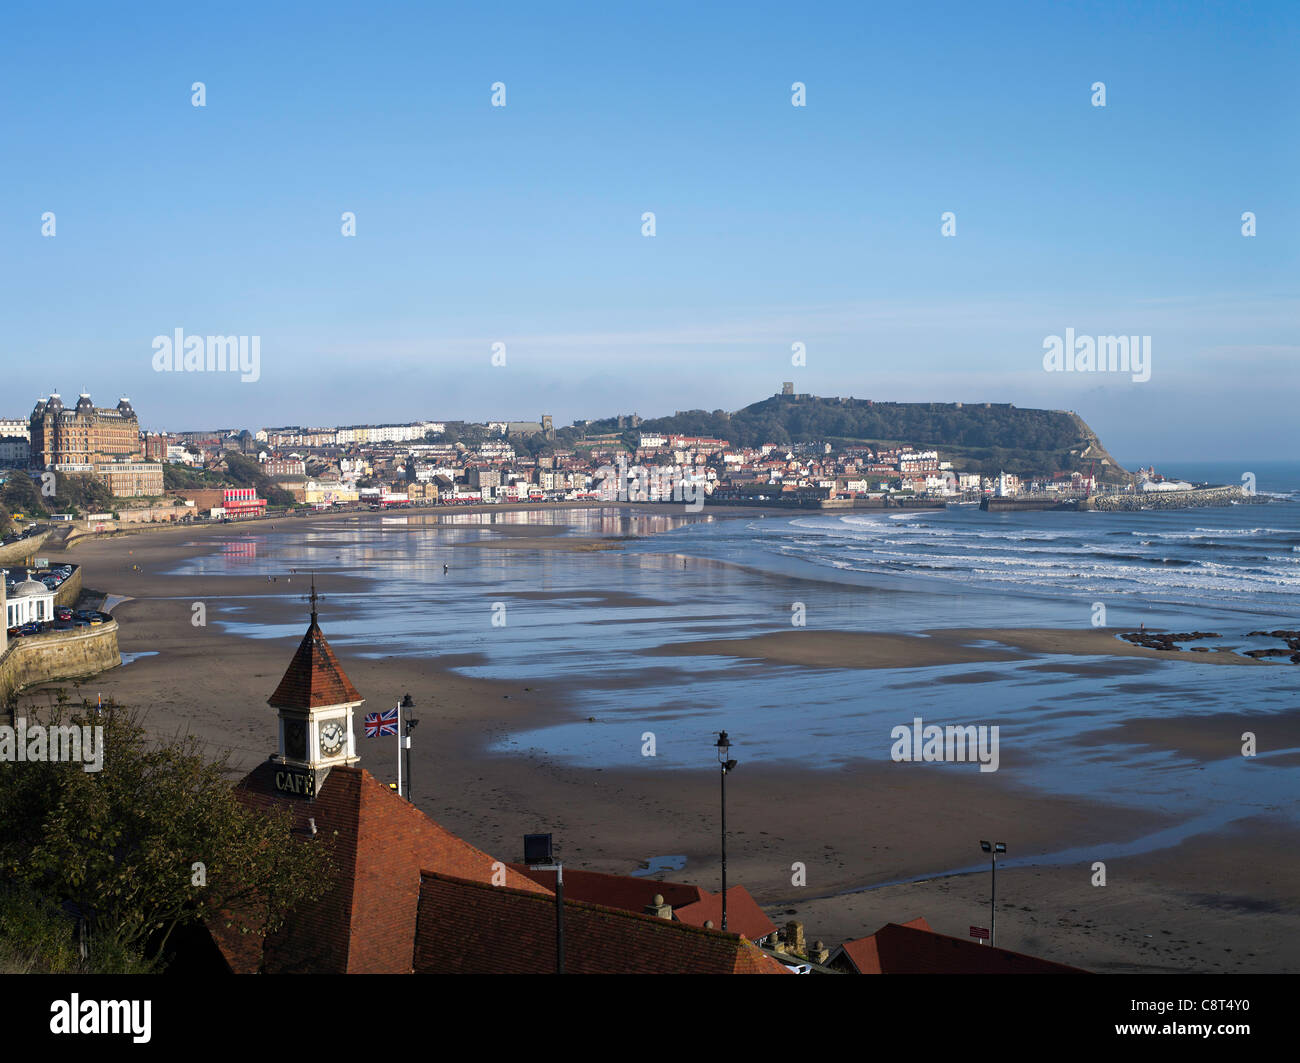 Dh South Bay Scarborough North Yorkshire herbst Meer Strand Stadt Bay Cafe clock uk Seaside Stockfoto